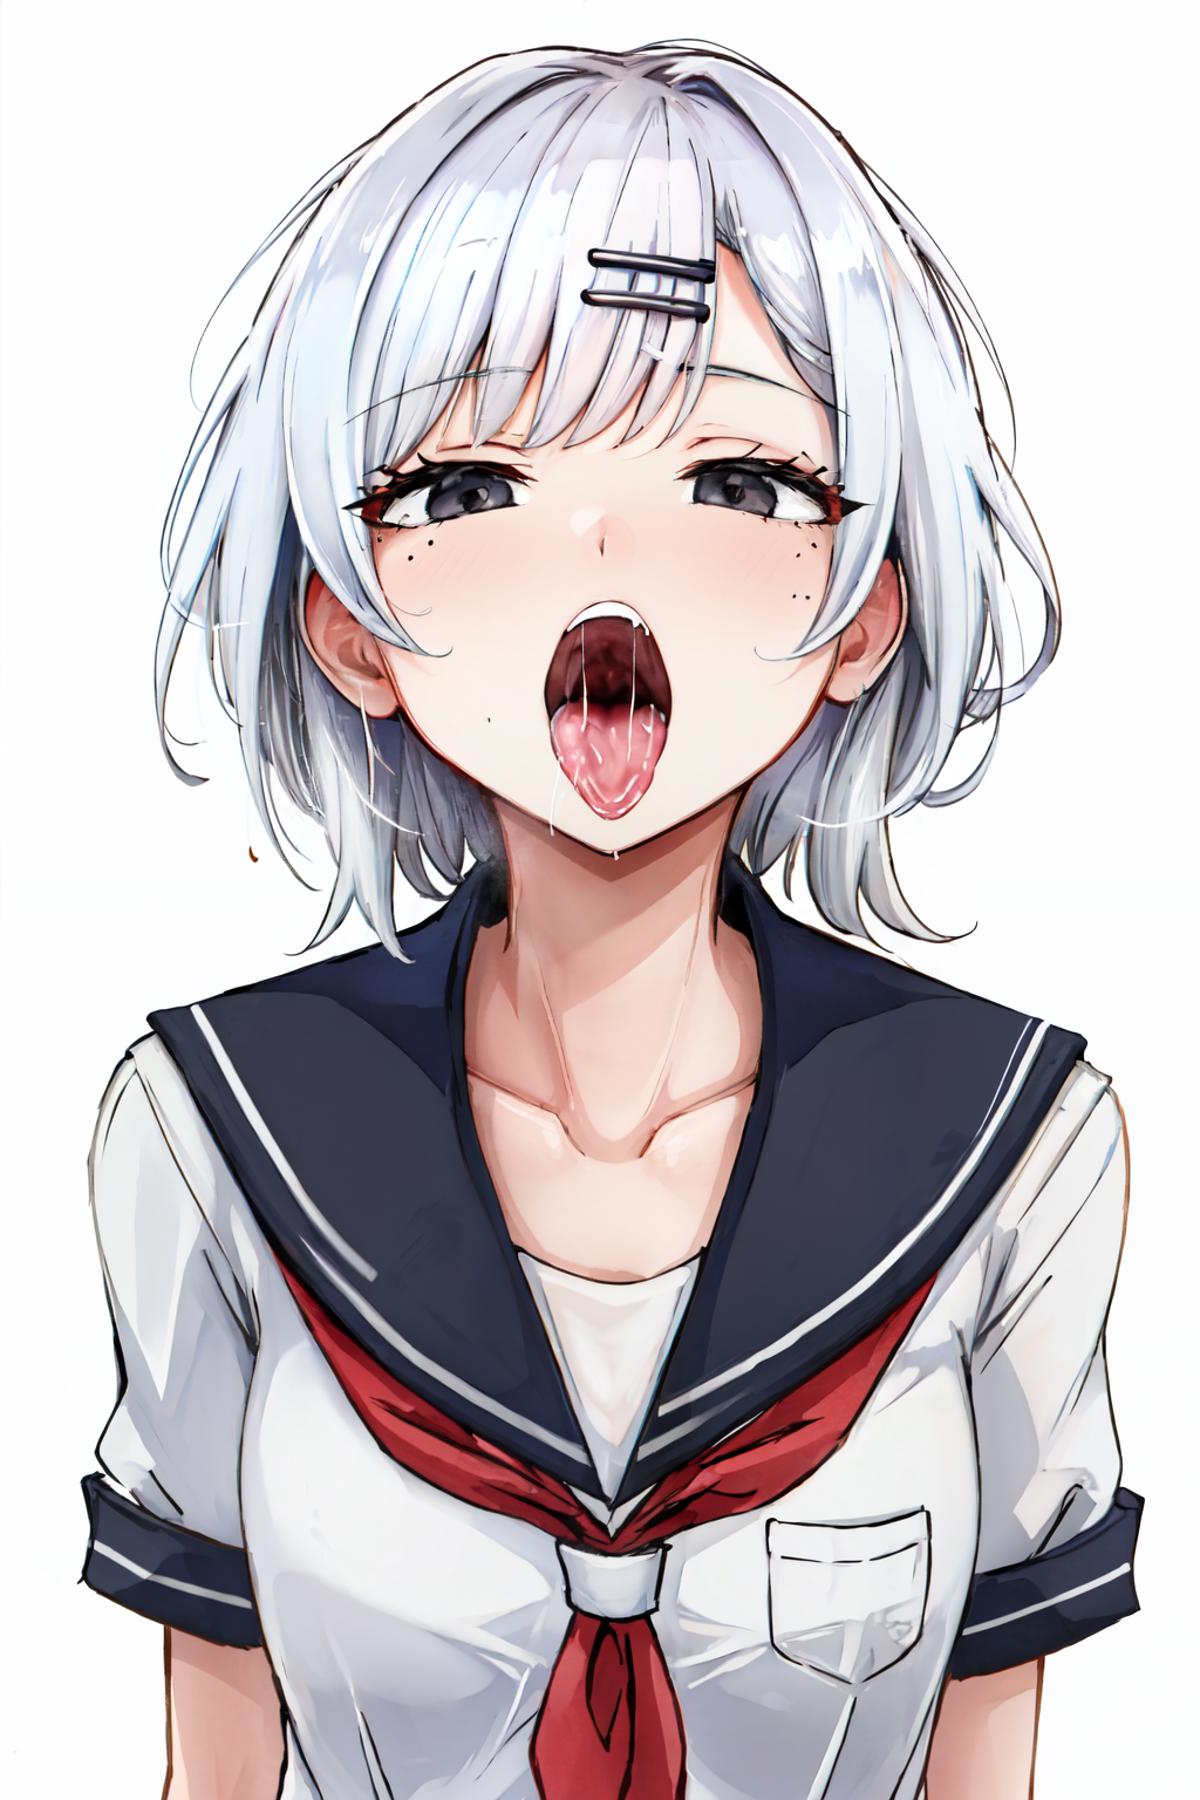 A young girl with a sailor uniform and a red bow in her mouth.